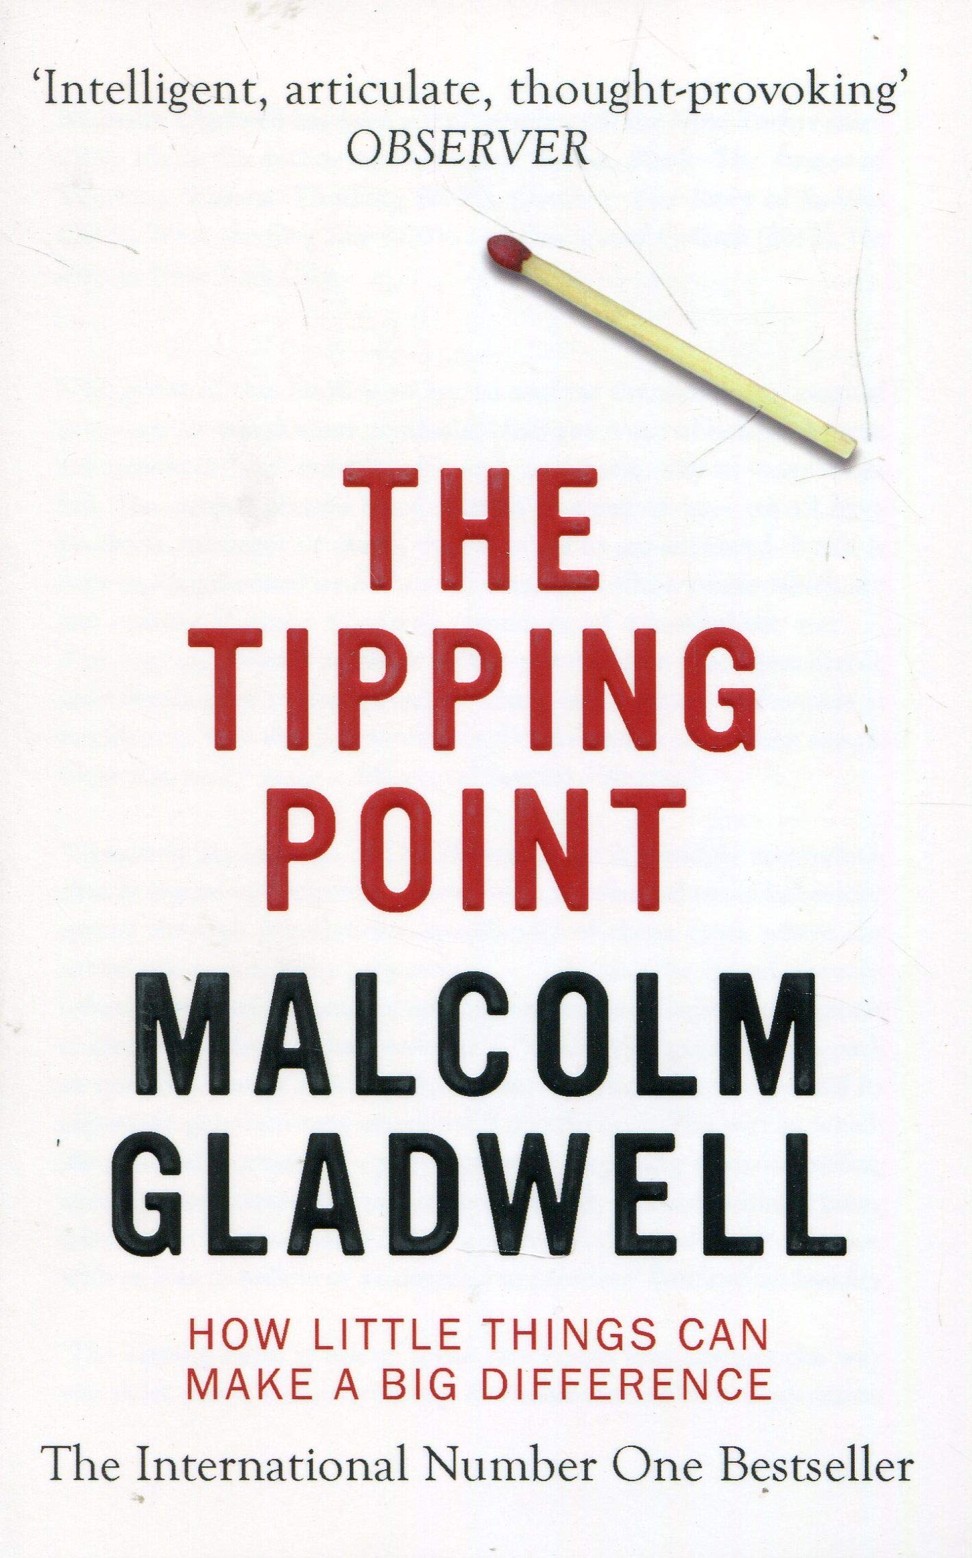 The Tipping Point by Malcolm Gladwell.